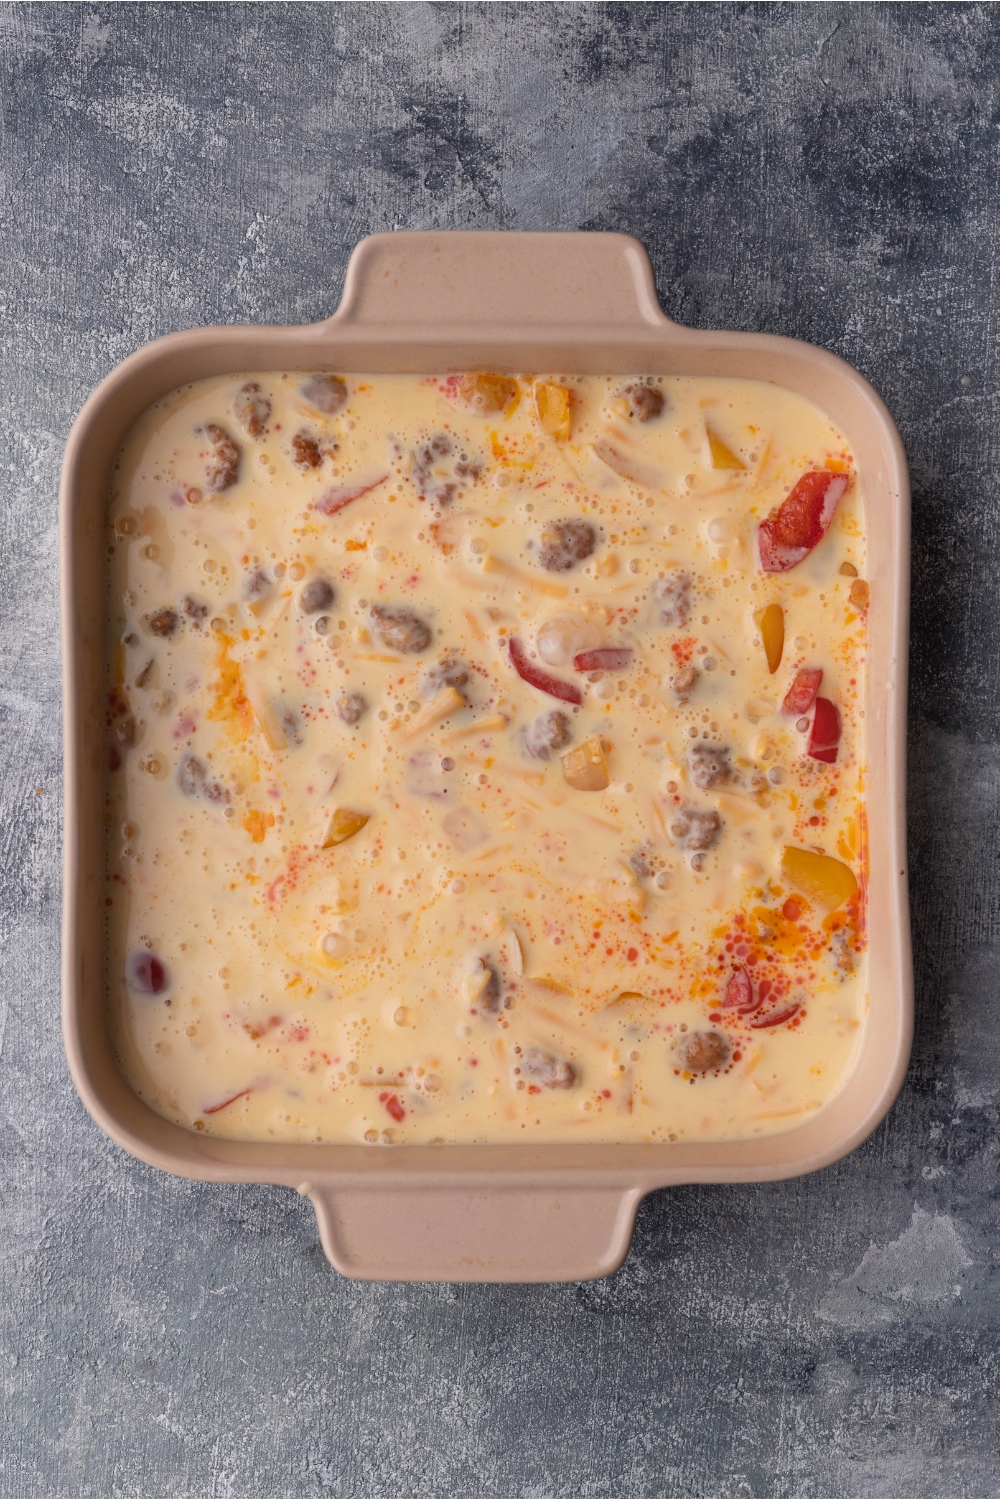 A brown casserole dish with sausage, peppers, onions, and an egg and cream mixture has been added to the dish. The dish has not yet been baked and is still liquidy.